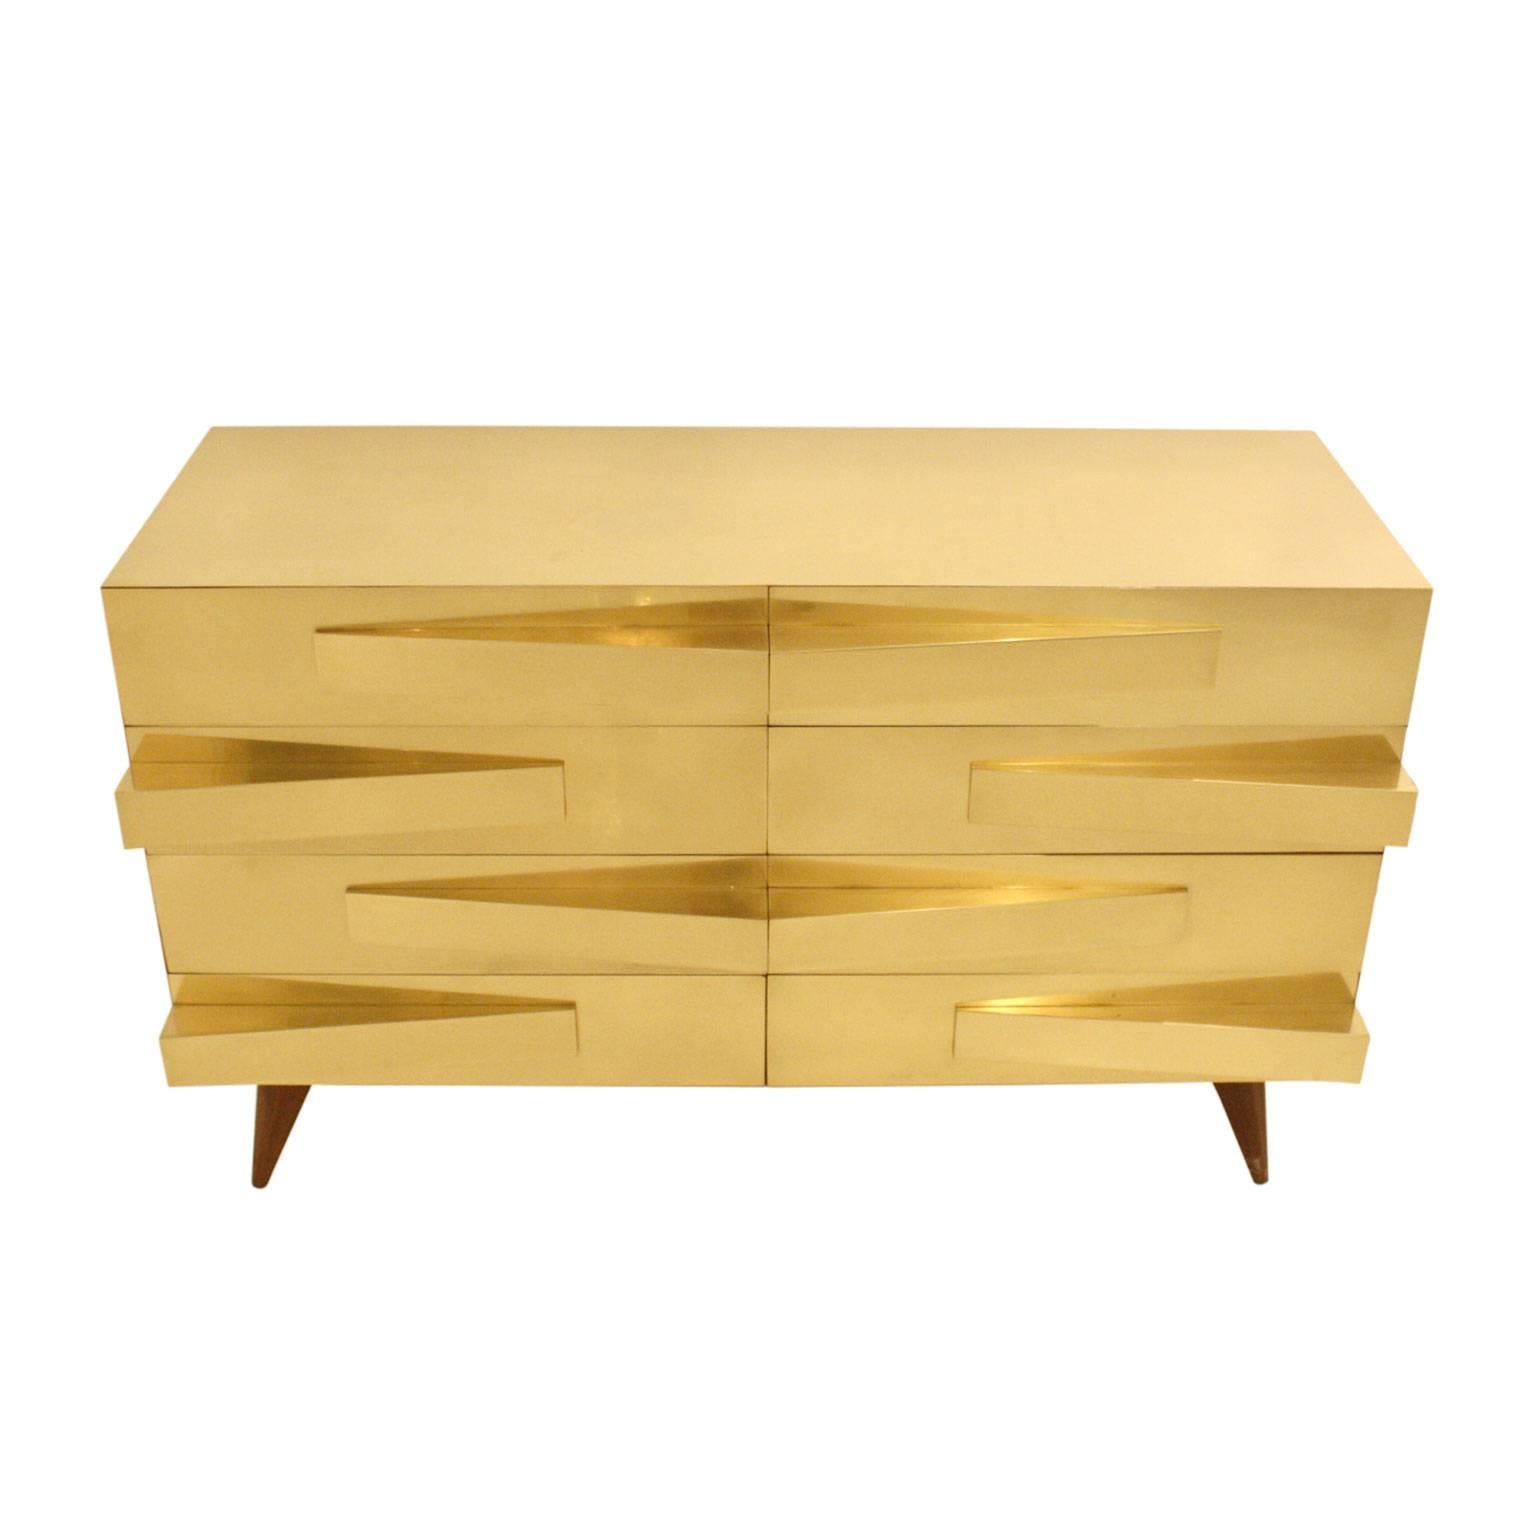 Pair of chests of drawers in Gio Ponti style. Made of solid wood structure covered in brass.

Our main target is customer satisfaction, so we include in the price for this item professional and custom made packing.

Every item LA Studio offers is